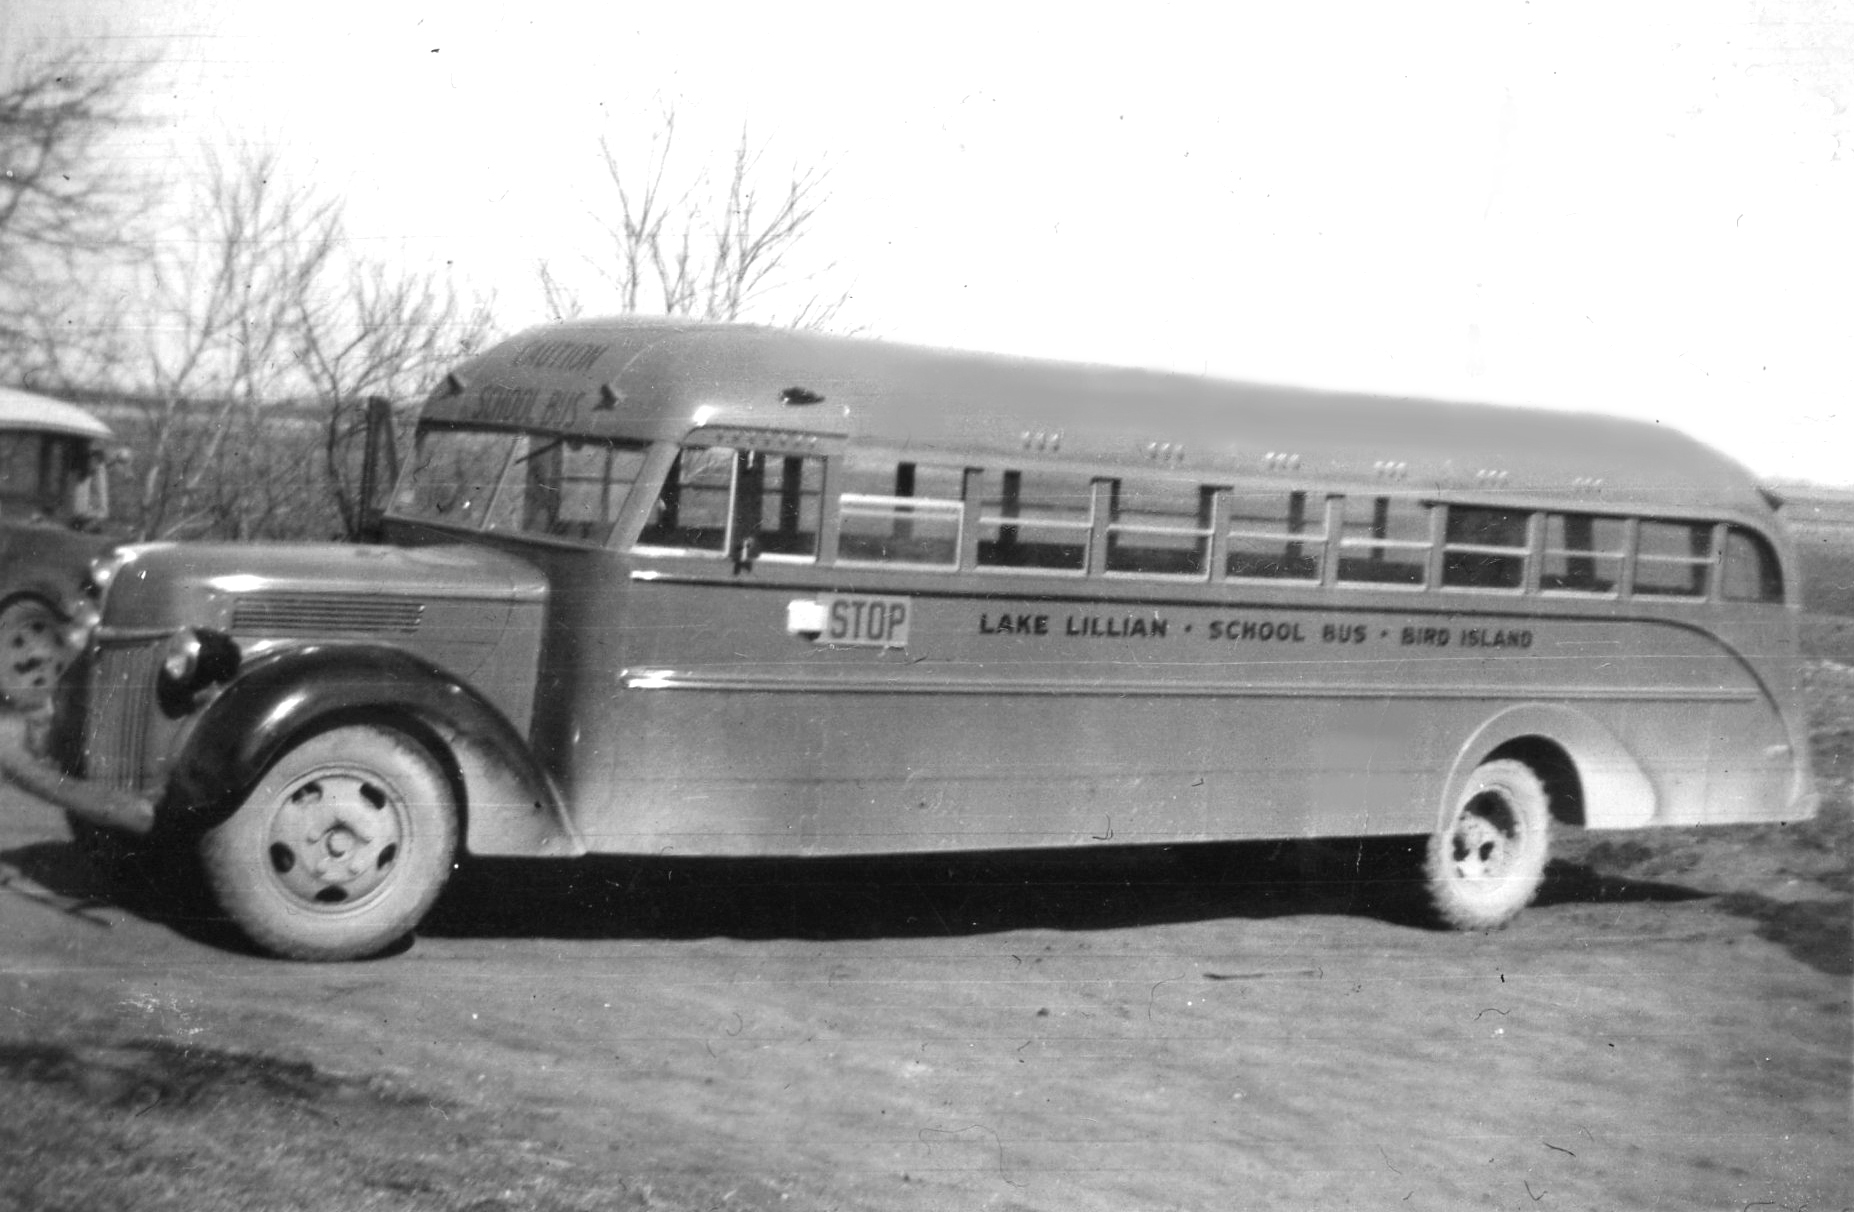 This bus was used for a long time